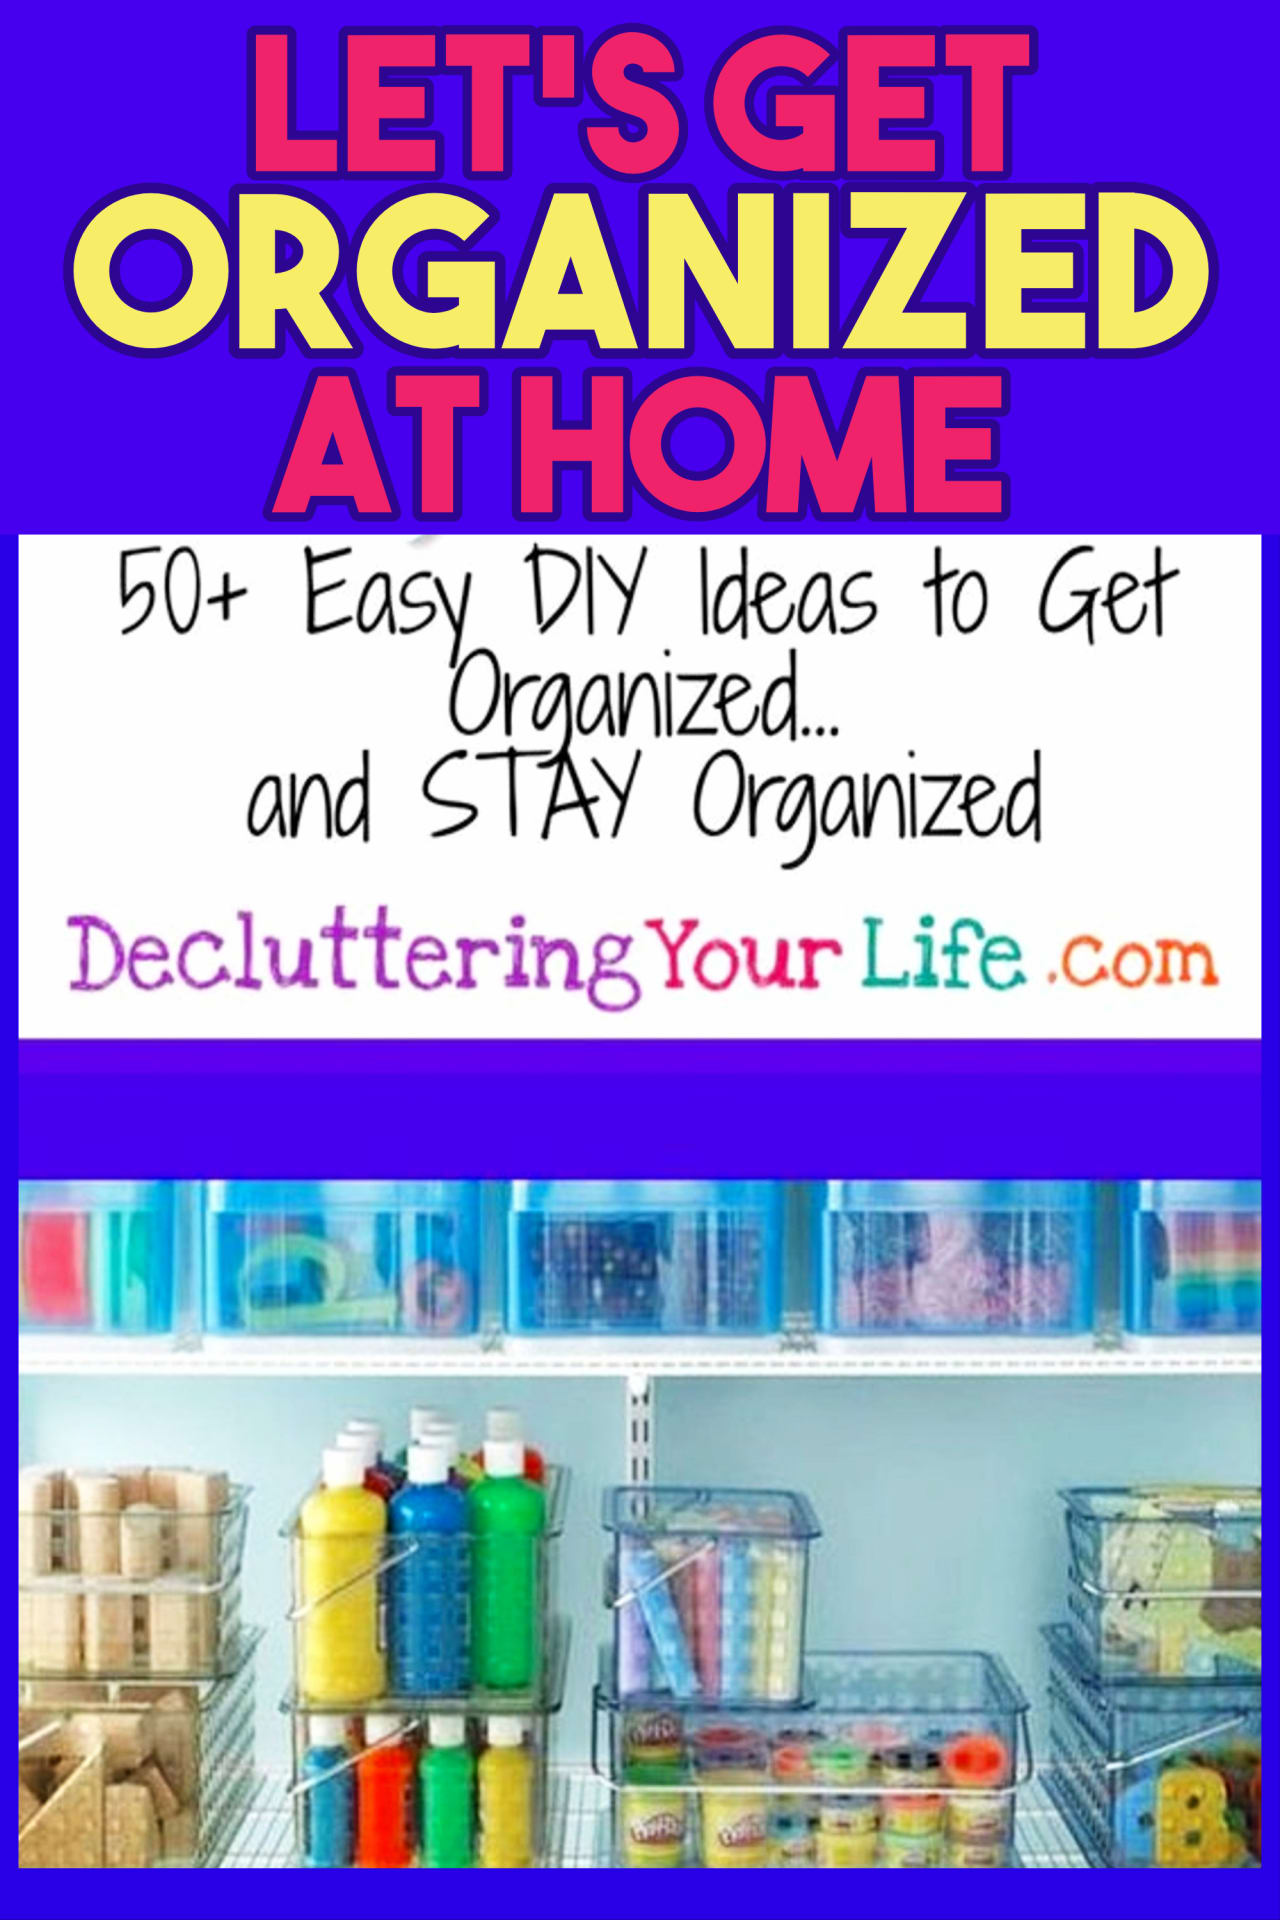 Get organized at home DIY ideas for getting organized at home on a budget WITHOUT feeling overwhelmed - declutter and organize your home